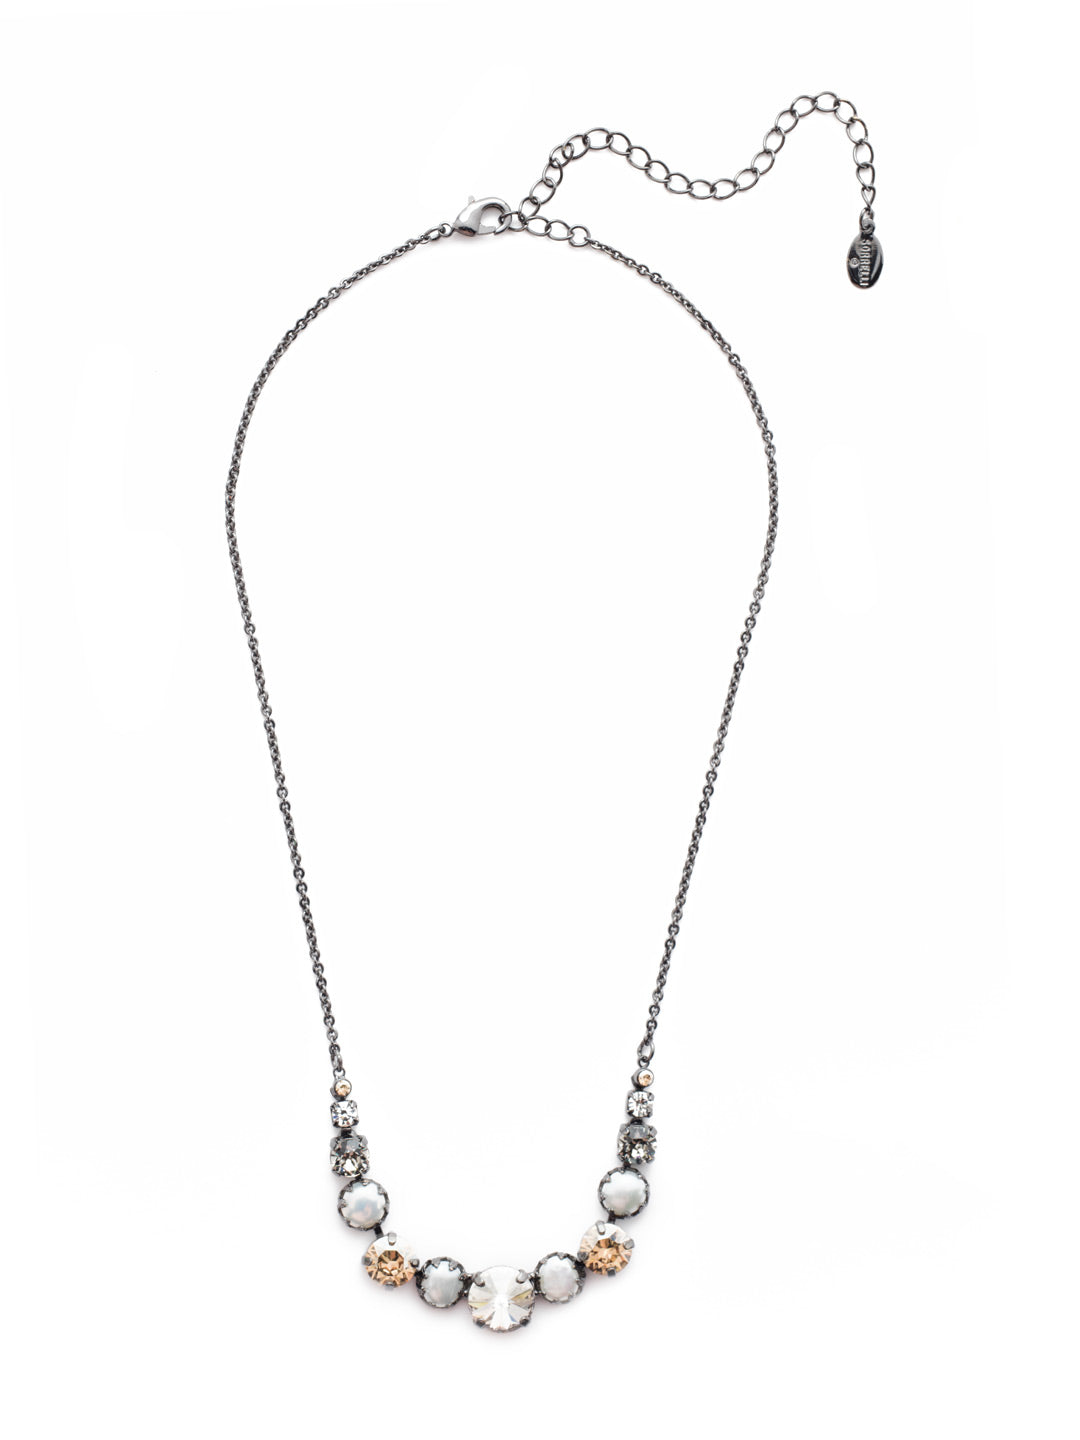 Dallas Tennis Necklace - NEU14GMGNS - <p>The Dallas Tennis Necklace is quintessential Sorrelli. Circular crystal sparklers pair with classic freshwater pearls, making this the perfect additon to your collection or to gift to someone just starting their Sorrelli journey. From Sorrelli's Golden Shadow collection in our Gun Metal finish.</p>